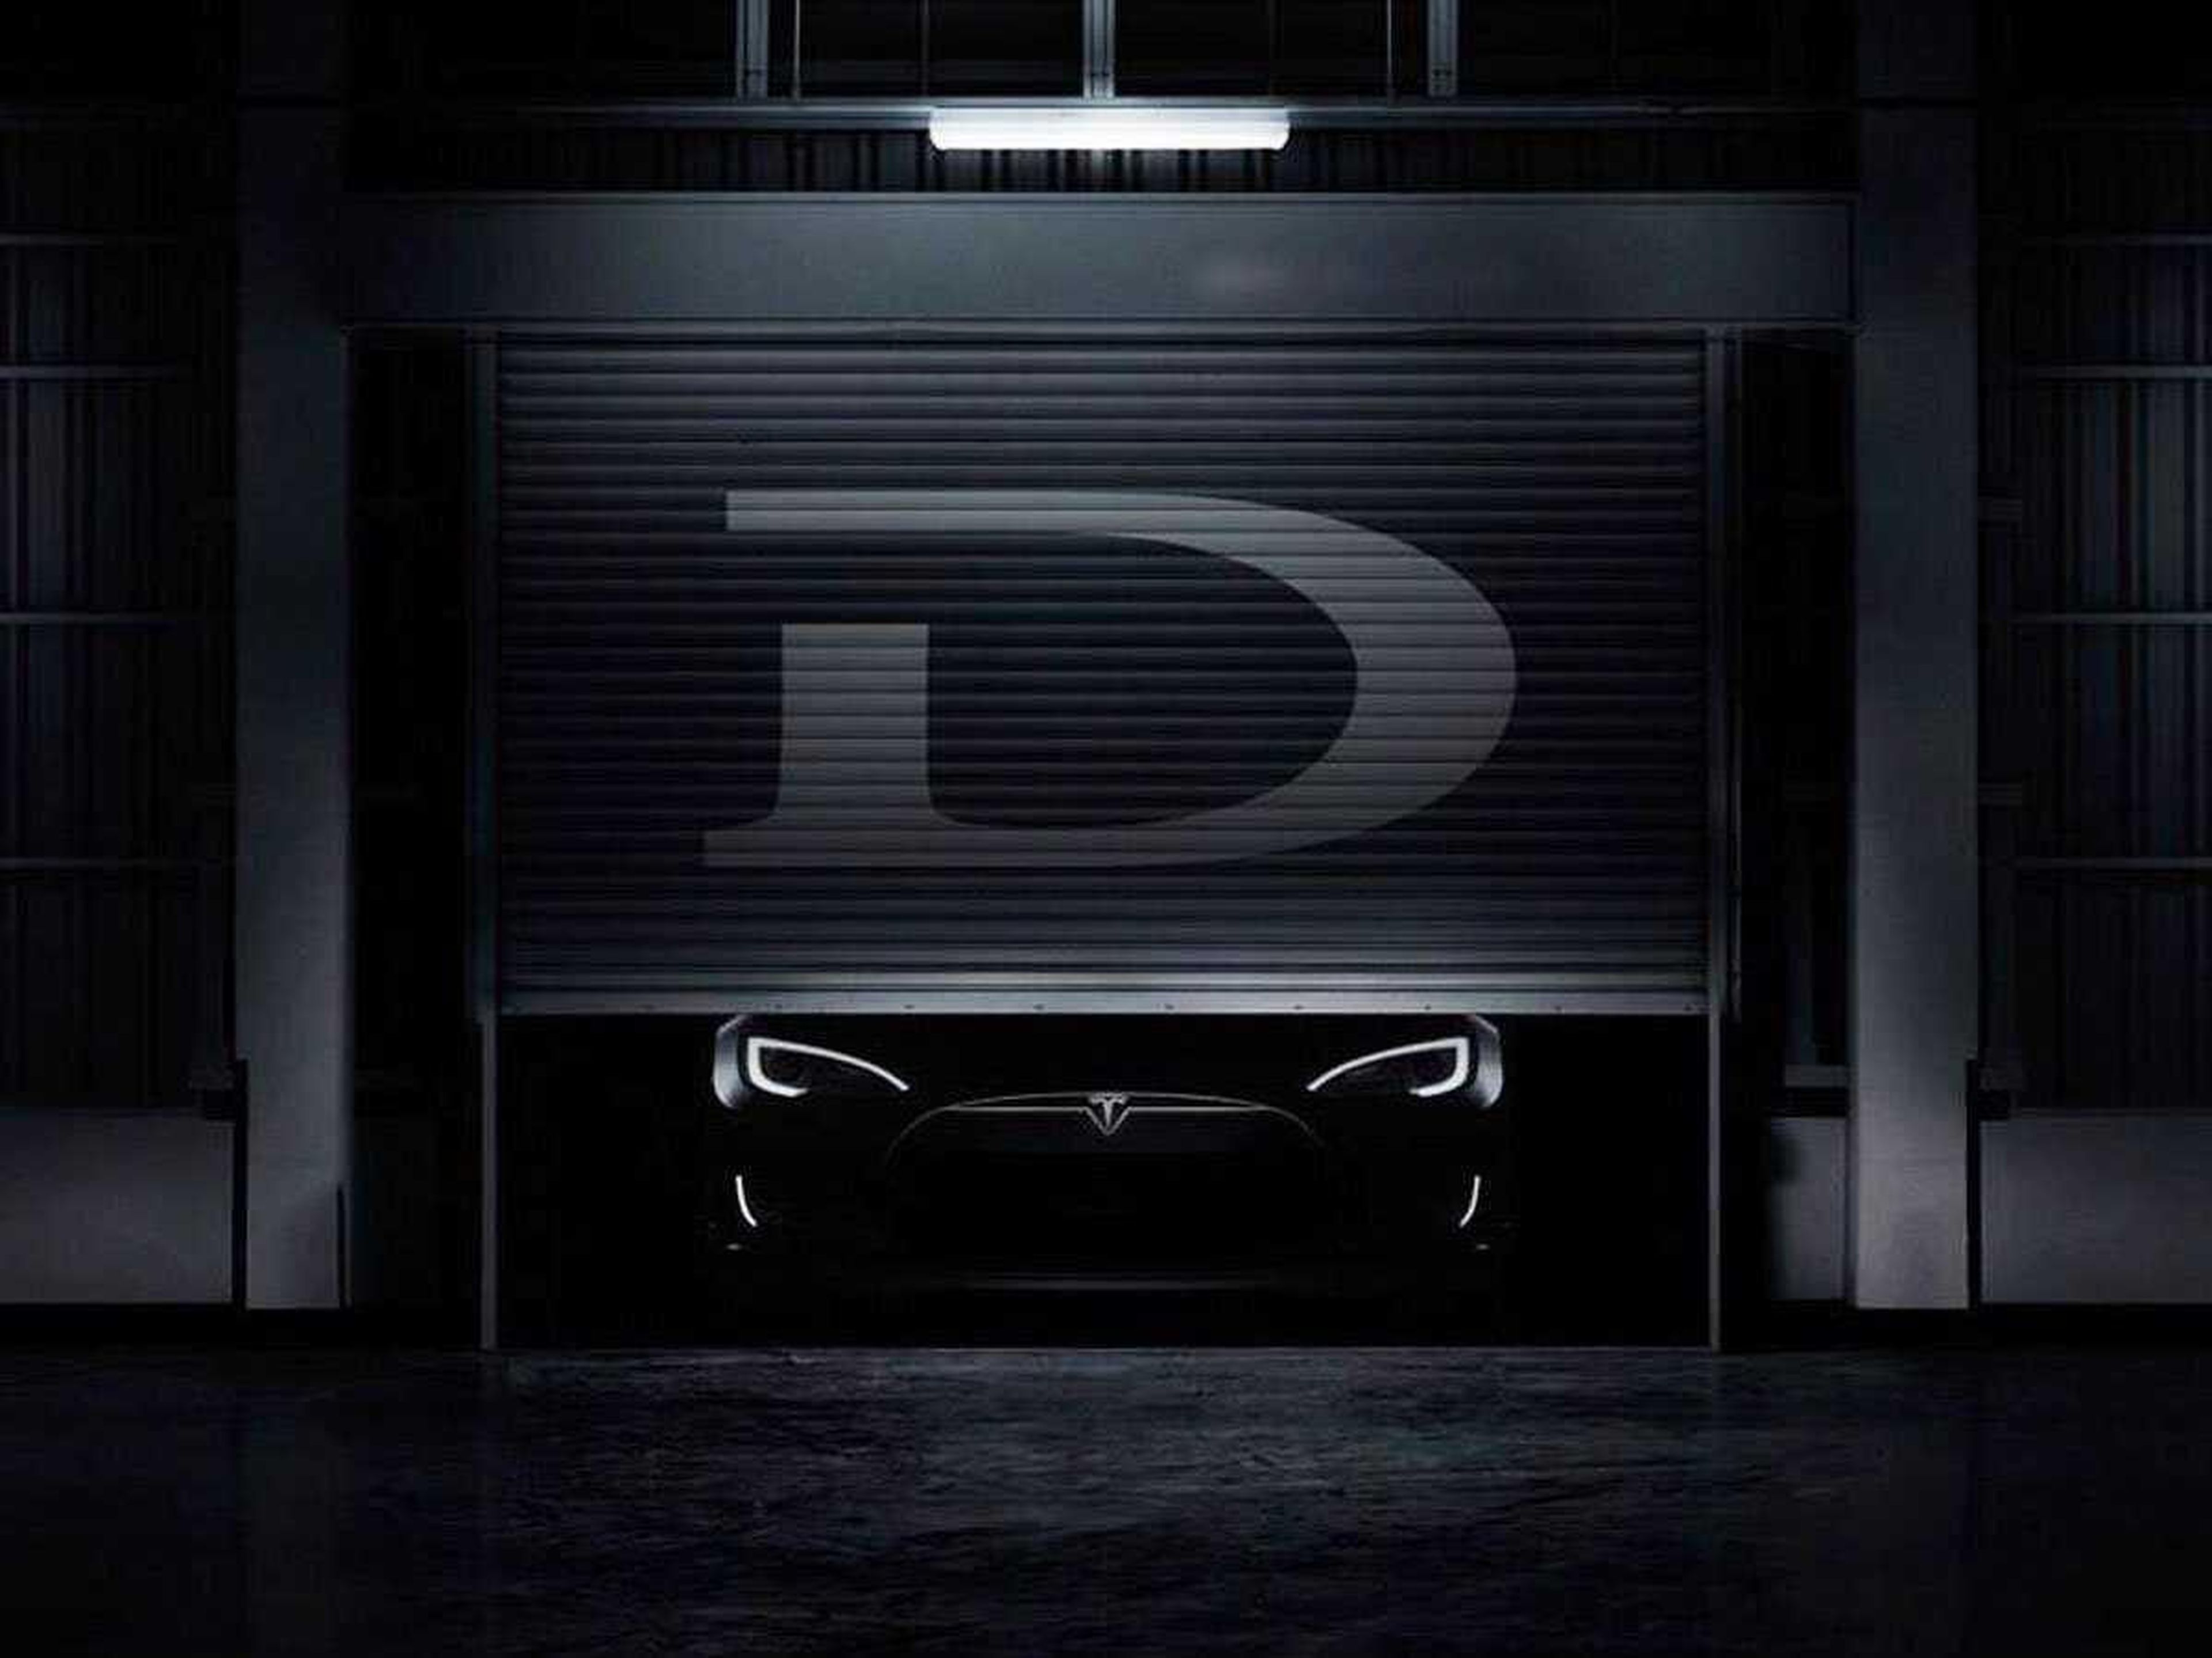 8. The D! Cryptically announced in 2015, the "D" meant "dual motor" — Tesla had added all-wheel-drive to the Model S.